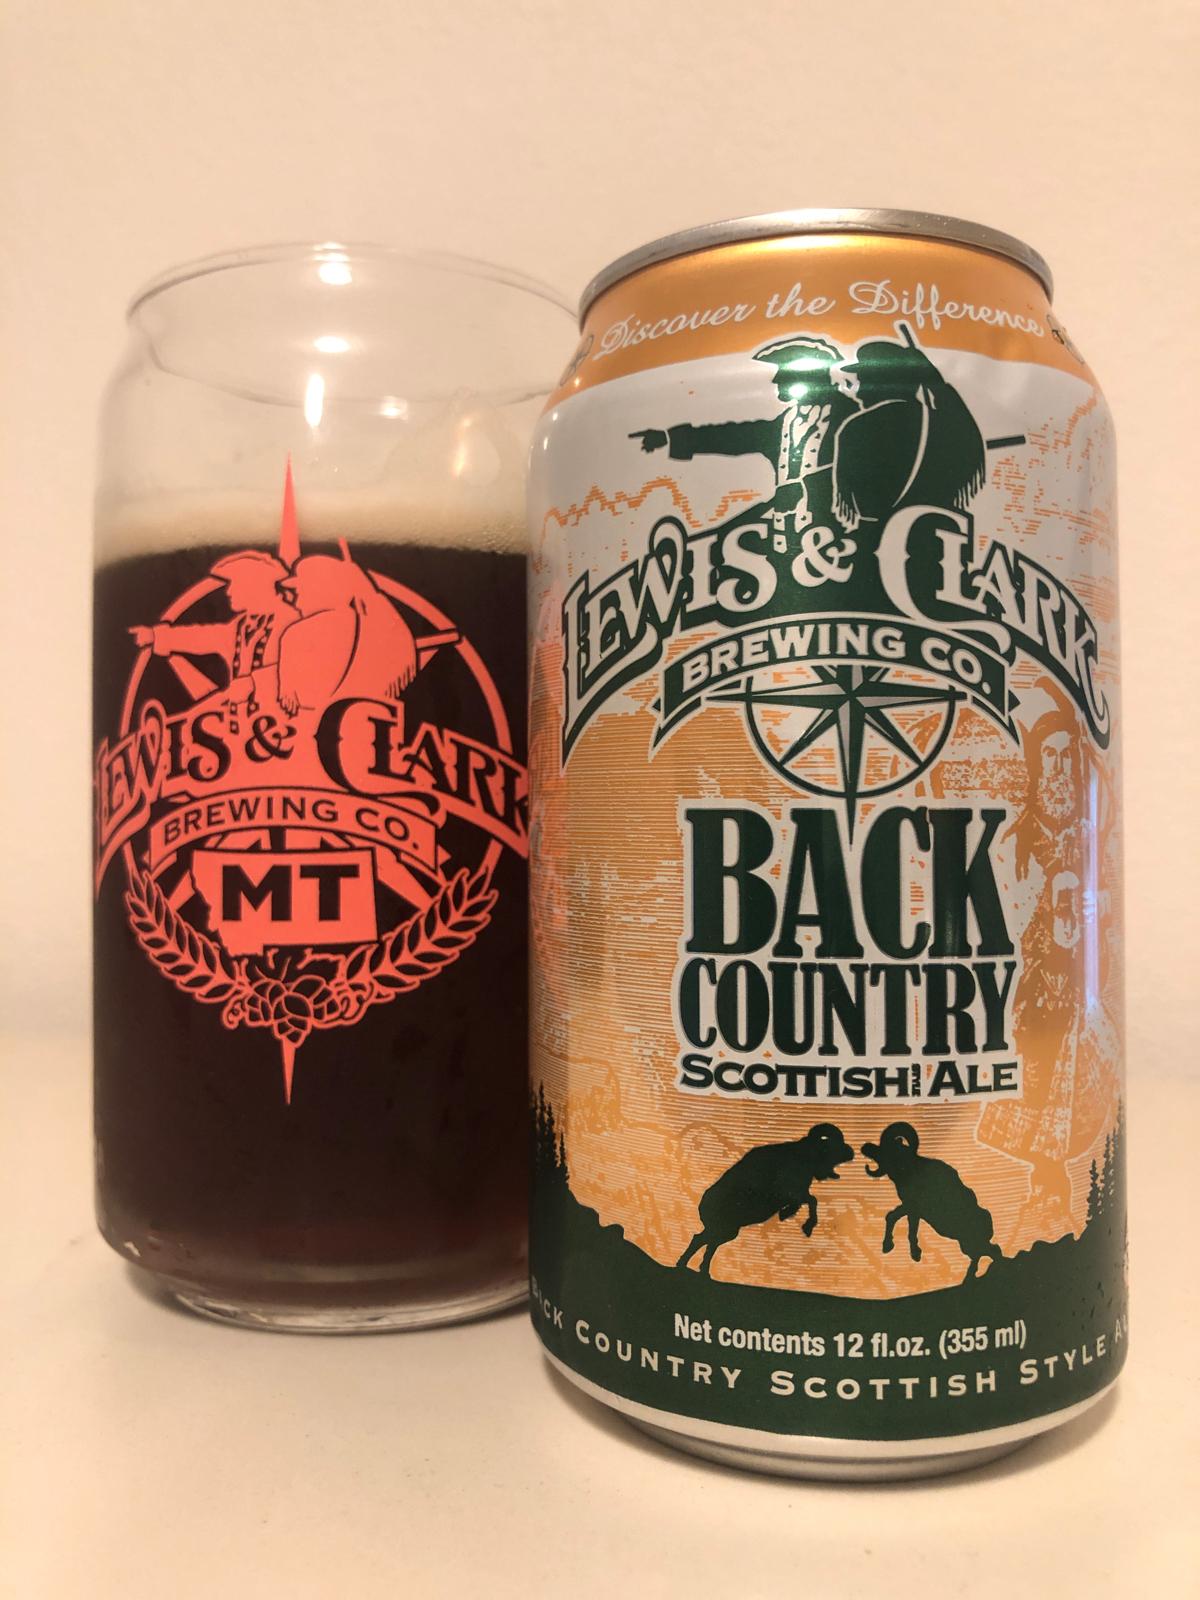 Back Country Scottish Ale